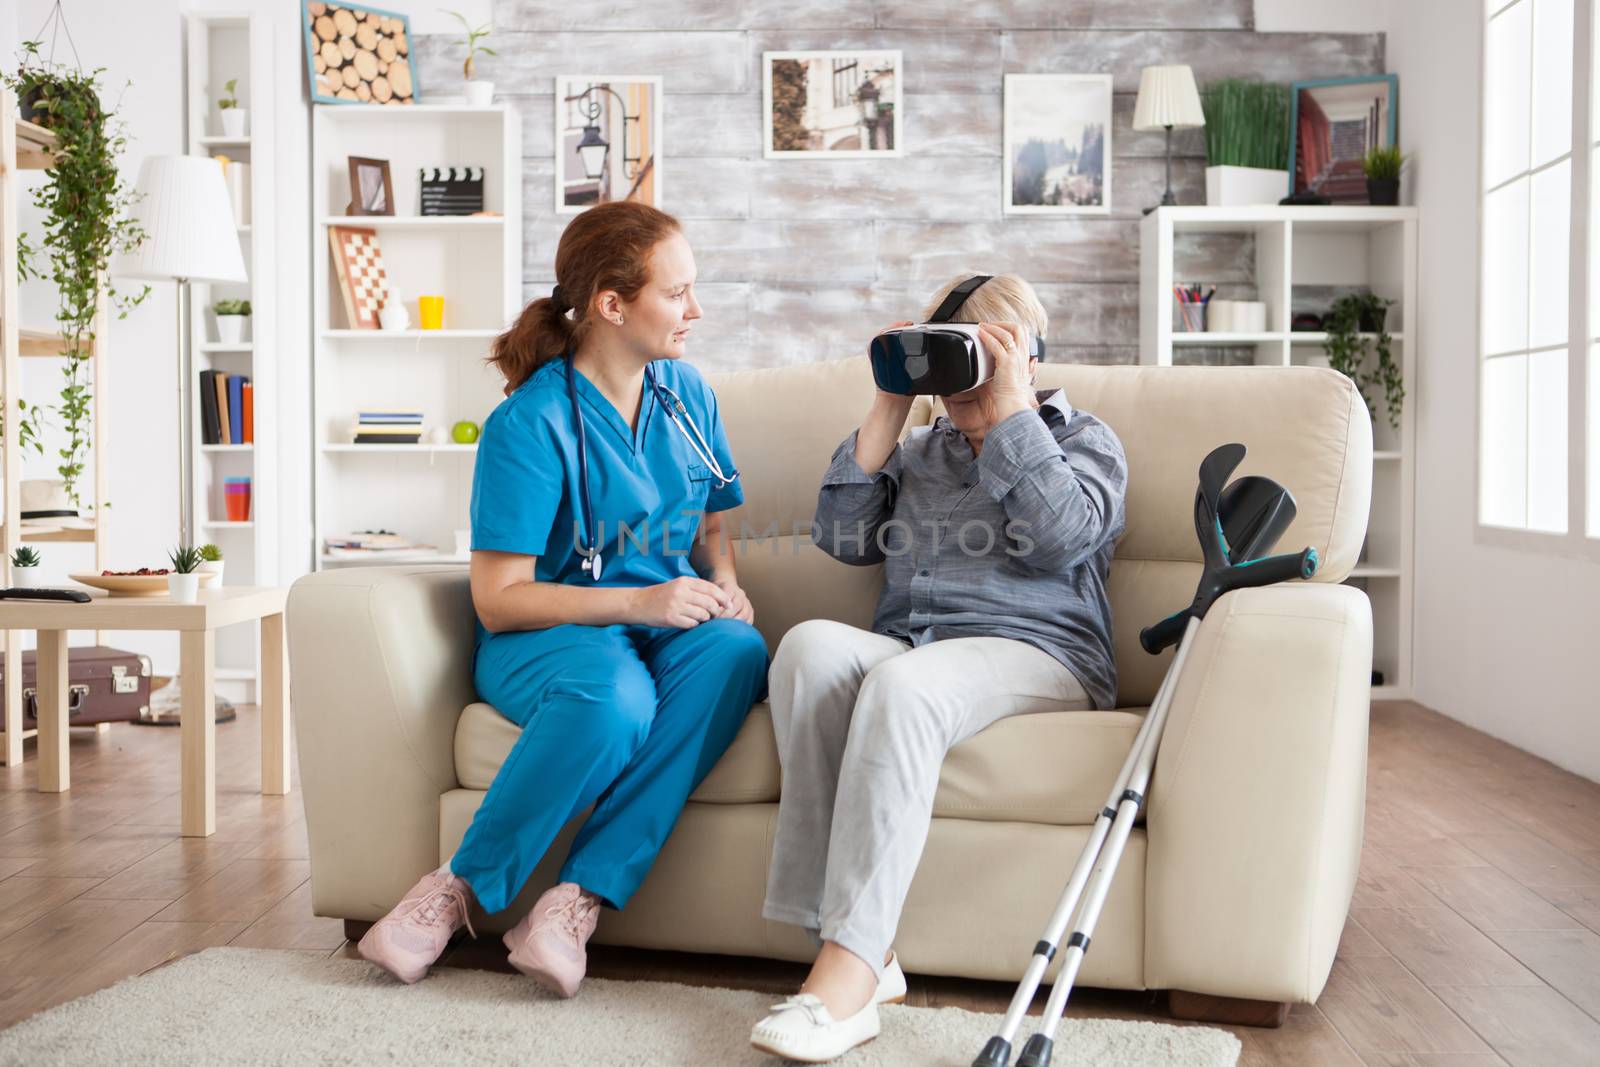 Old with with crutches in nursing home using virtual reality glasses with caregiver next to her.